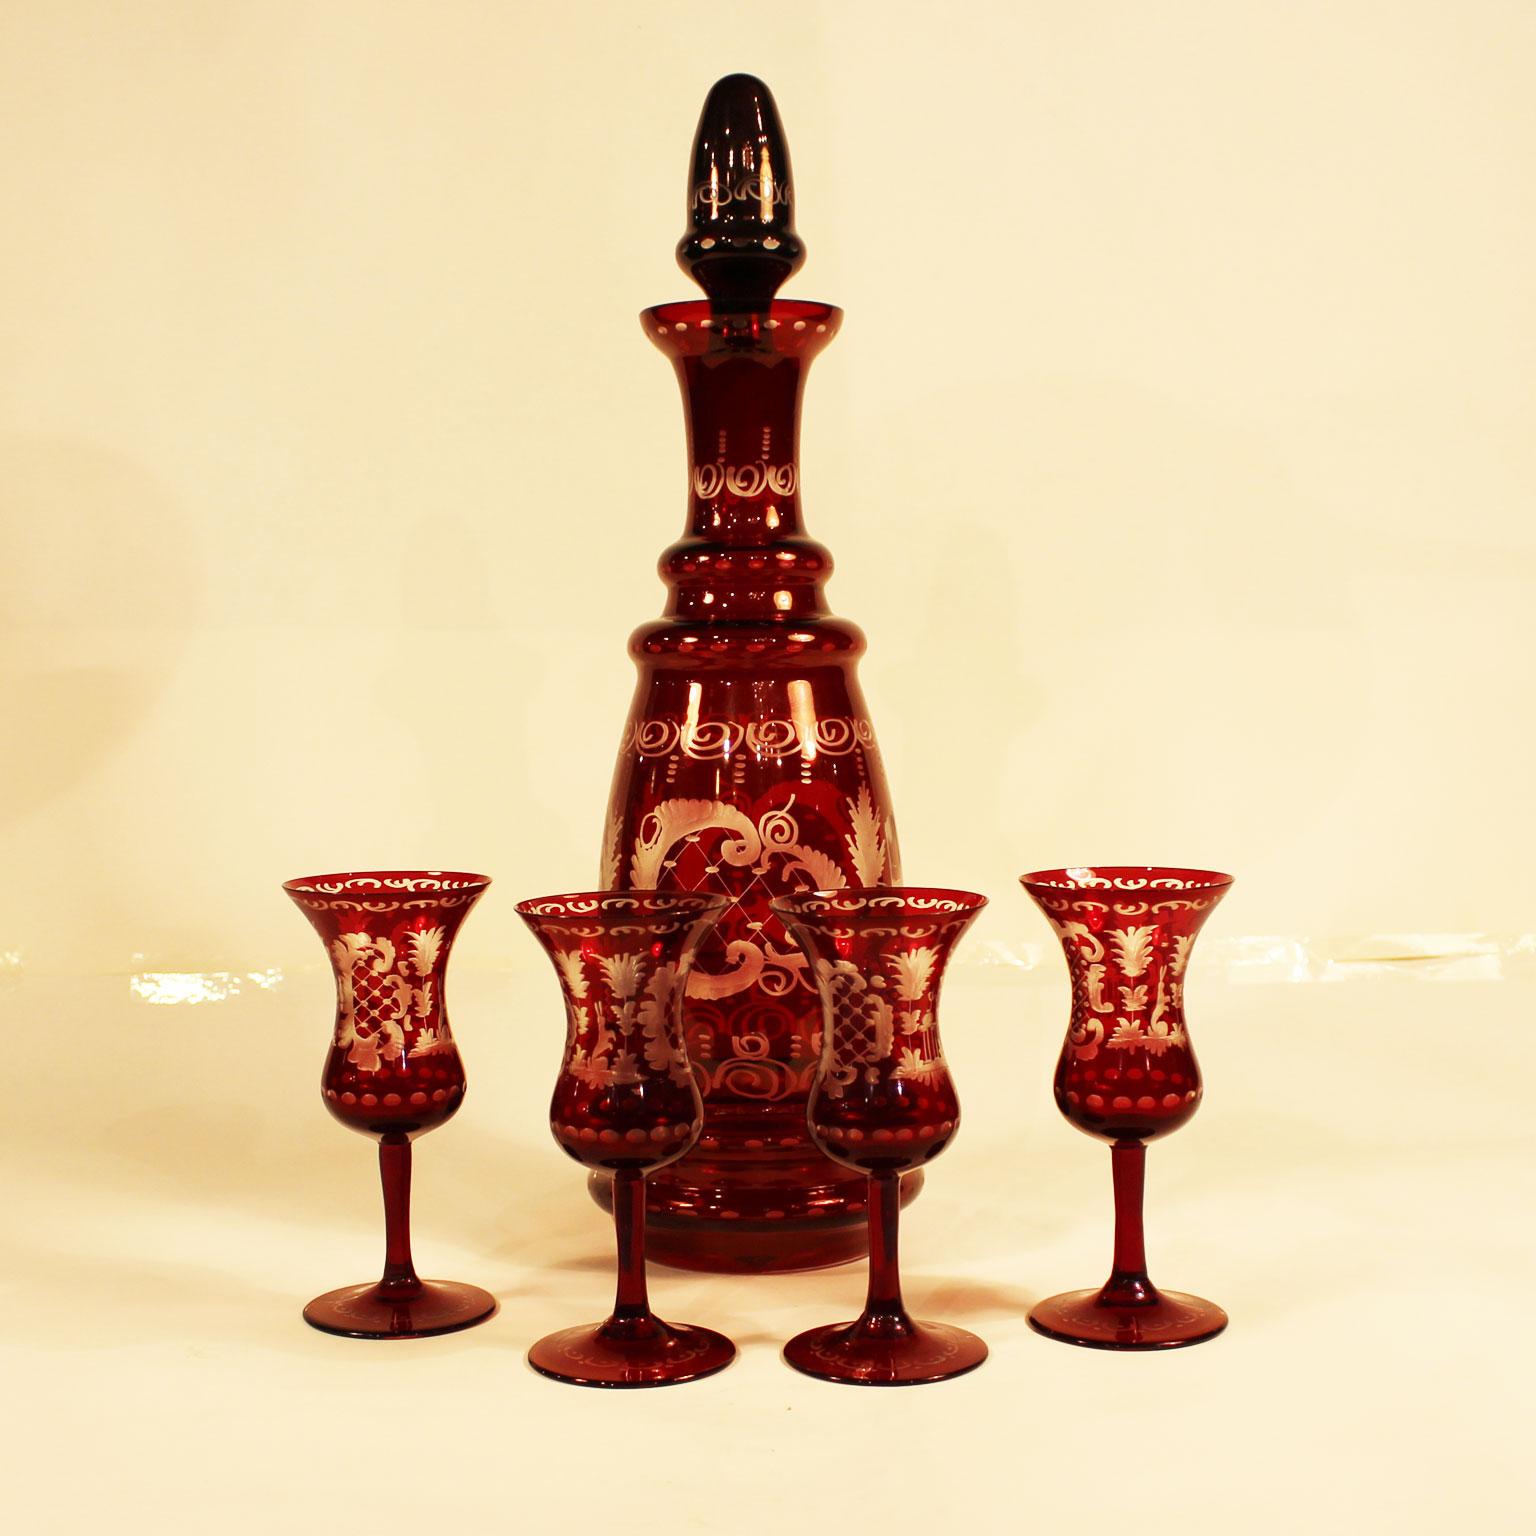 Carafe cut ruby glass with four glasses
Set of carafes and glasses, object of Wilhelminian craftsmanship, mouth-blown white glass, covered with ruby glass and cut in local motifs

Carafe H35 D11
Glasses H12 D5,6.